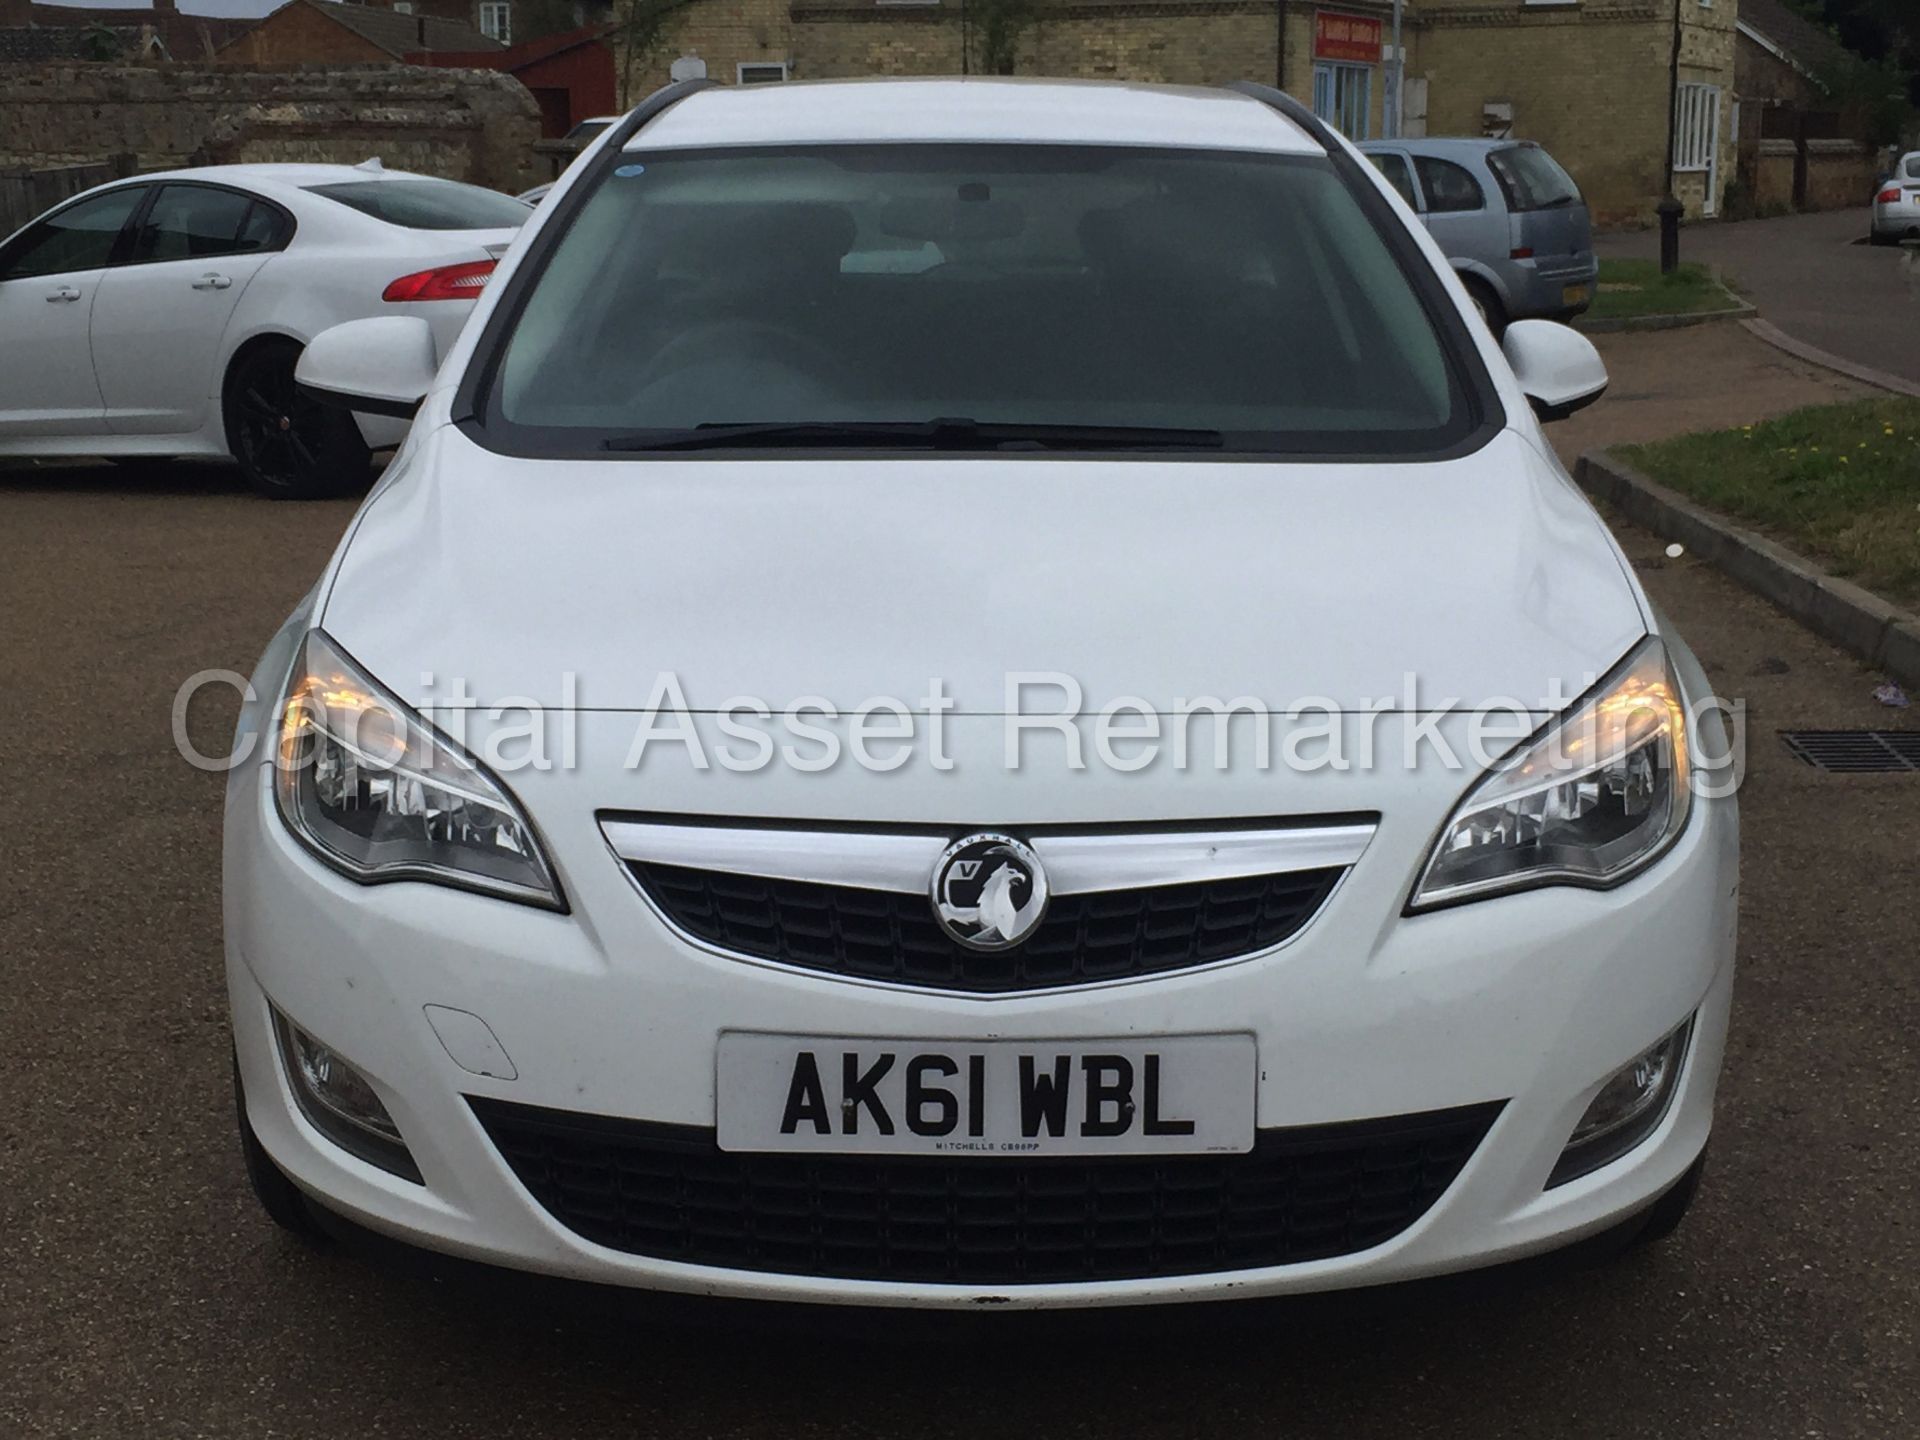 VAUXHALL ASTRA 'EXCLUSIVE' (2012 MODEL) '1.7 CDTI - ECOFLEX - 6 SPEED' *AIR CON* NO VAT - Image 3 of 24